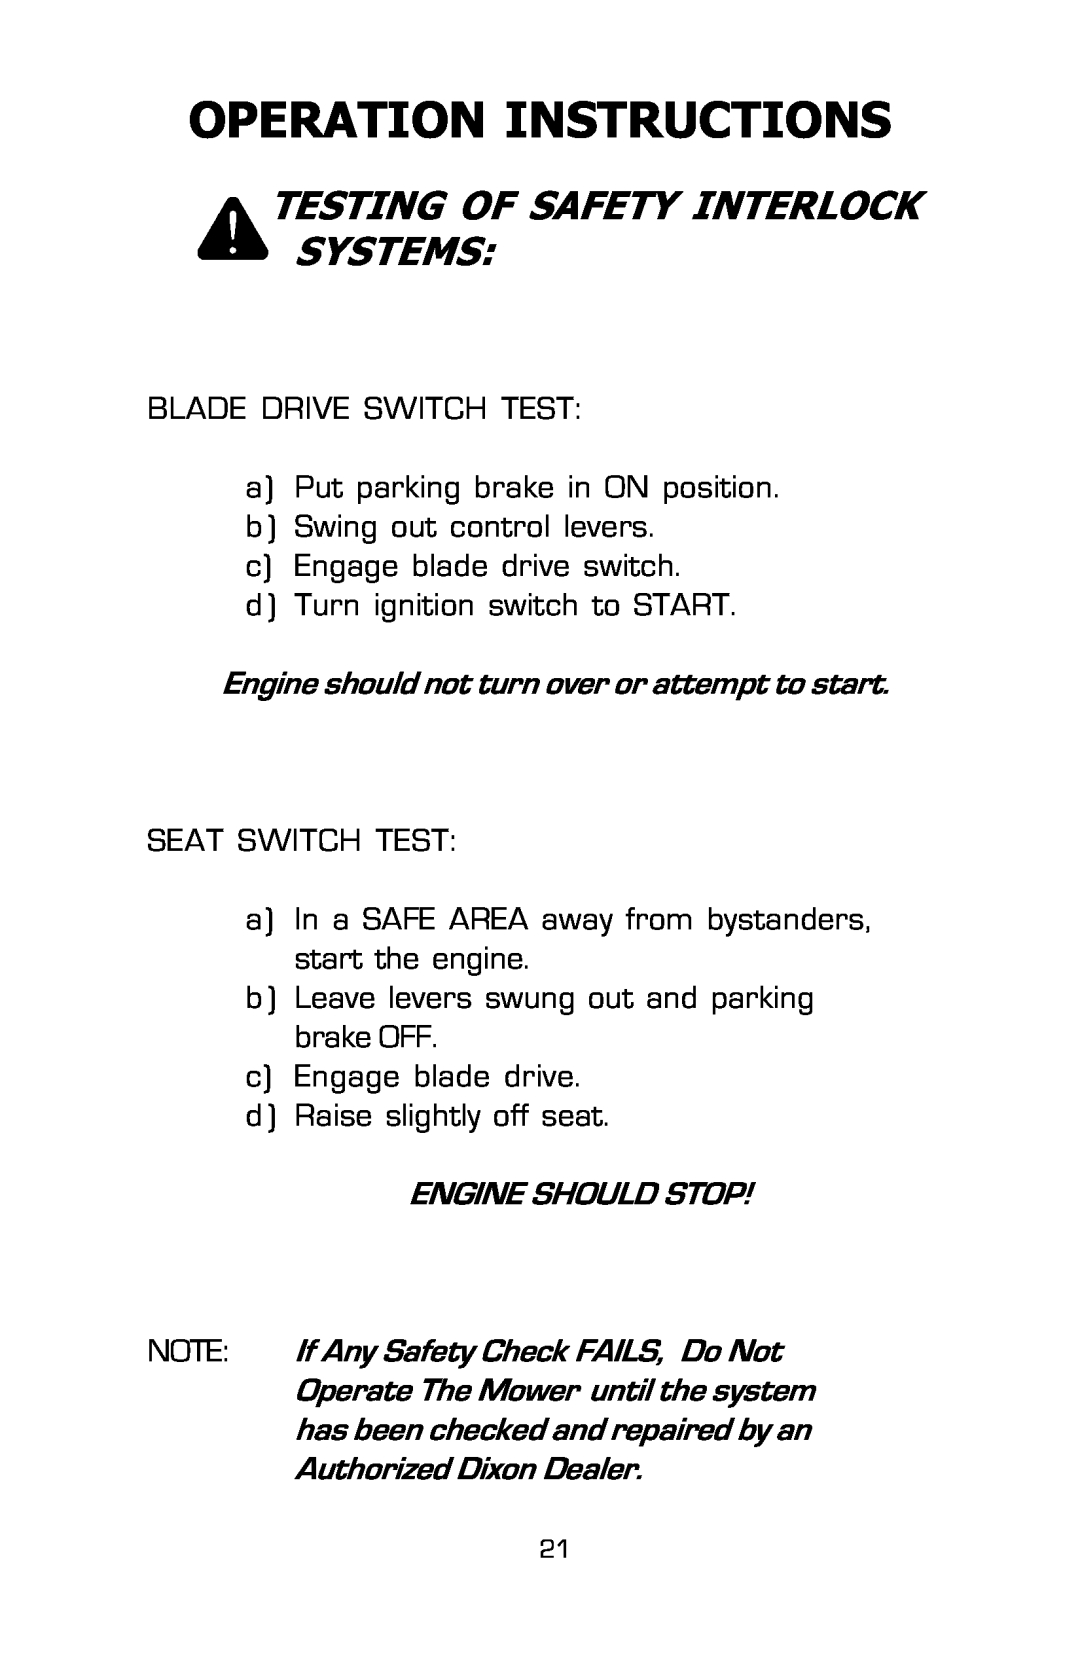 Dixon 16134-0803 manual Operation Instructions, Blade Drive Switch Test 